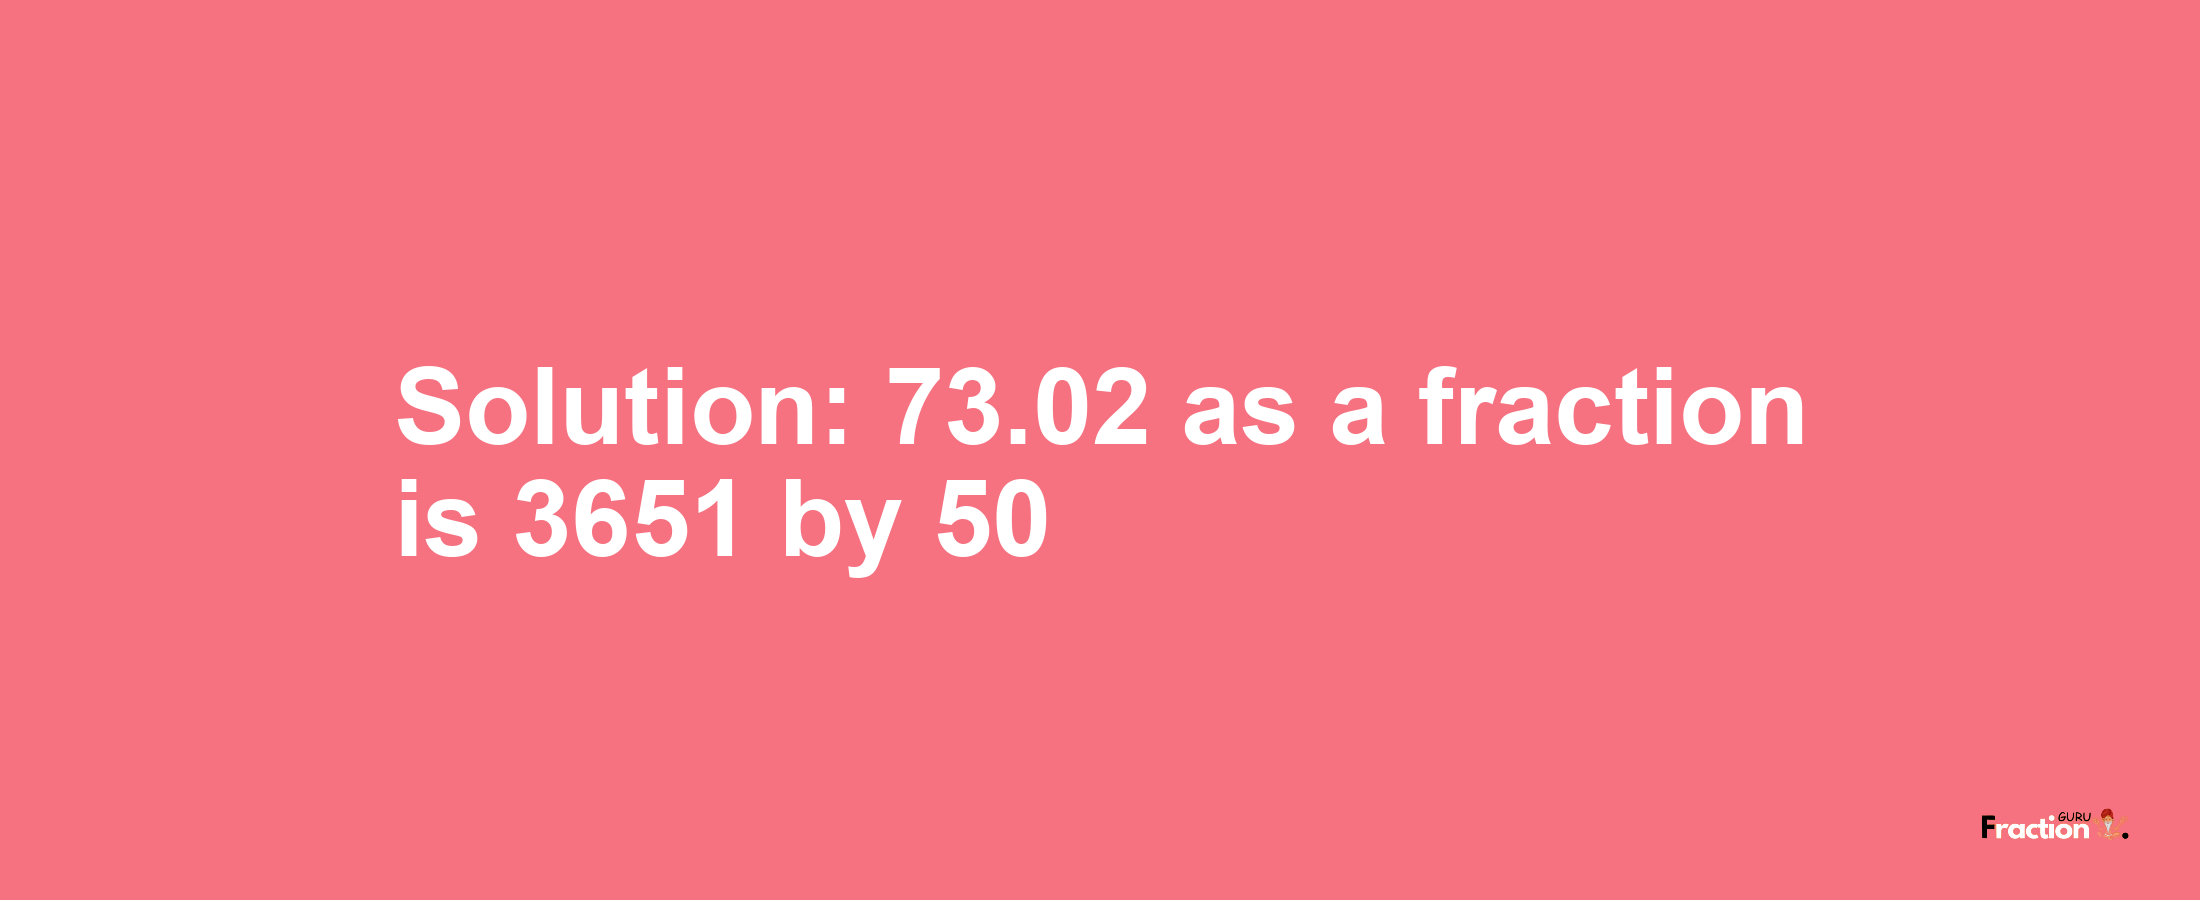 Solution:73.02 as a fraction is 3651/50